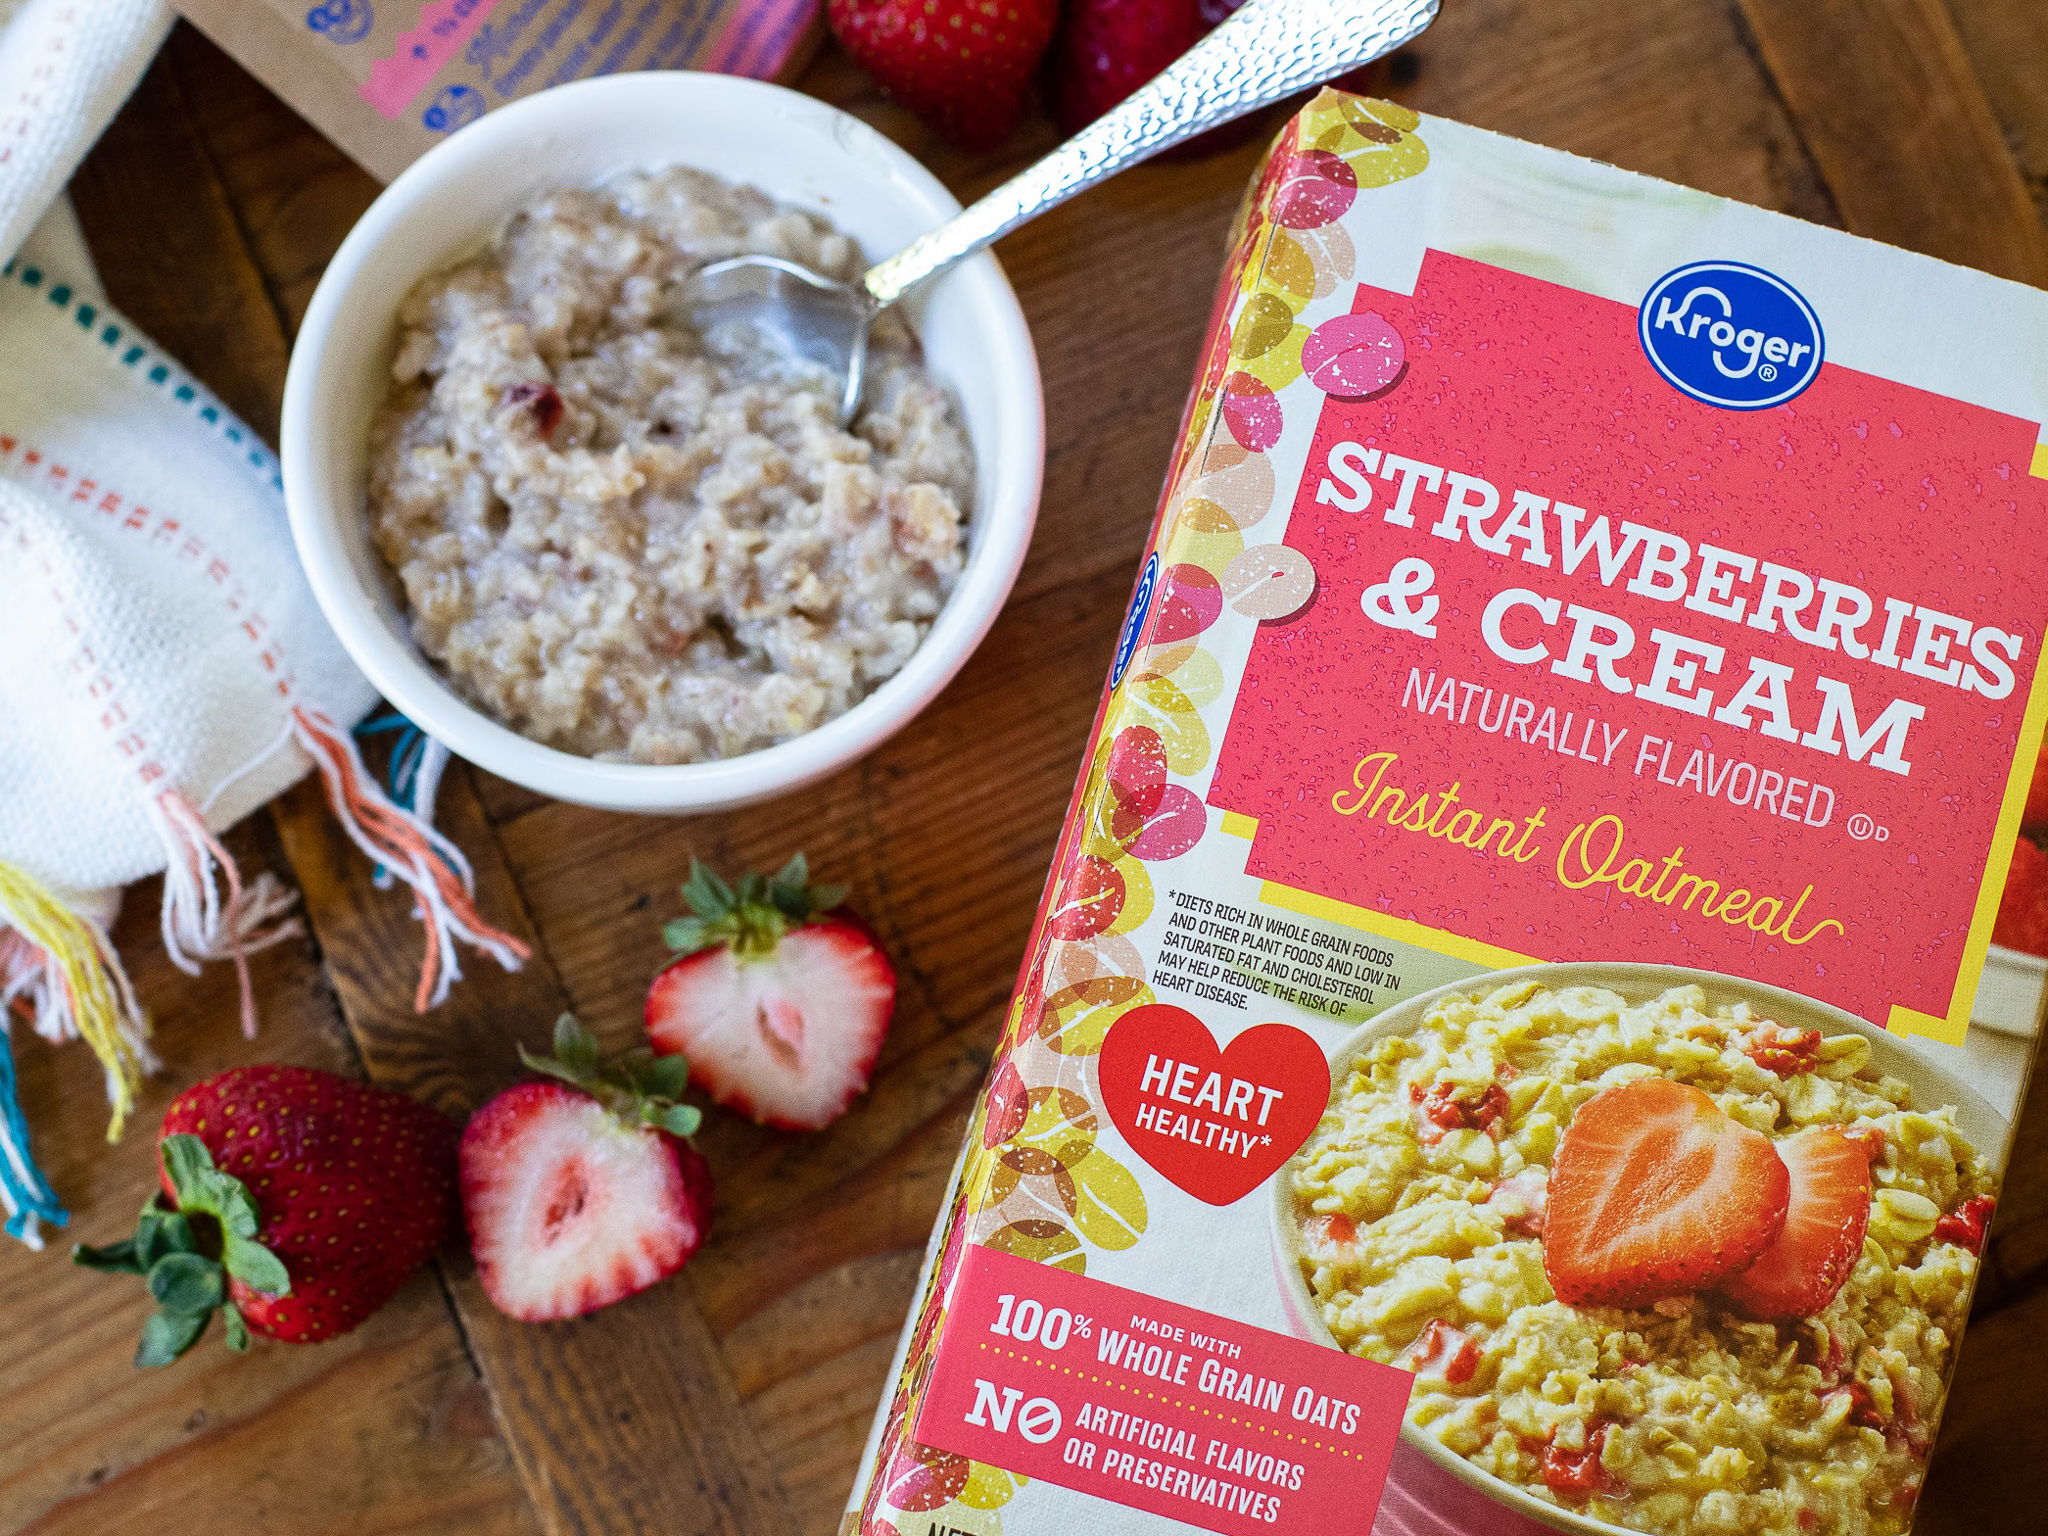 Better Oats Steel Cut and Instant Oatmeal are $1.99 at Kroger! - Kroger  Krazy